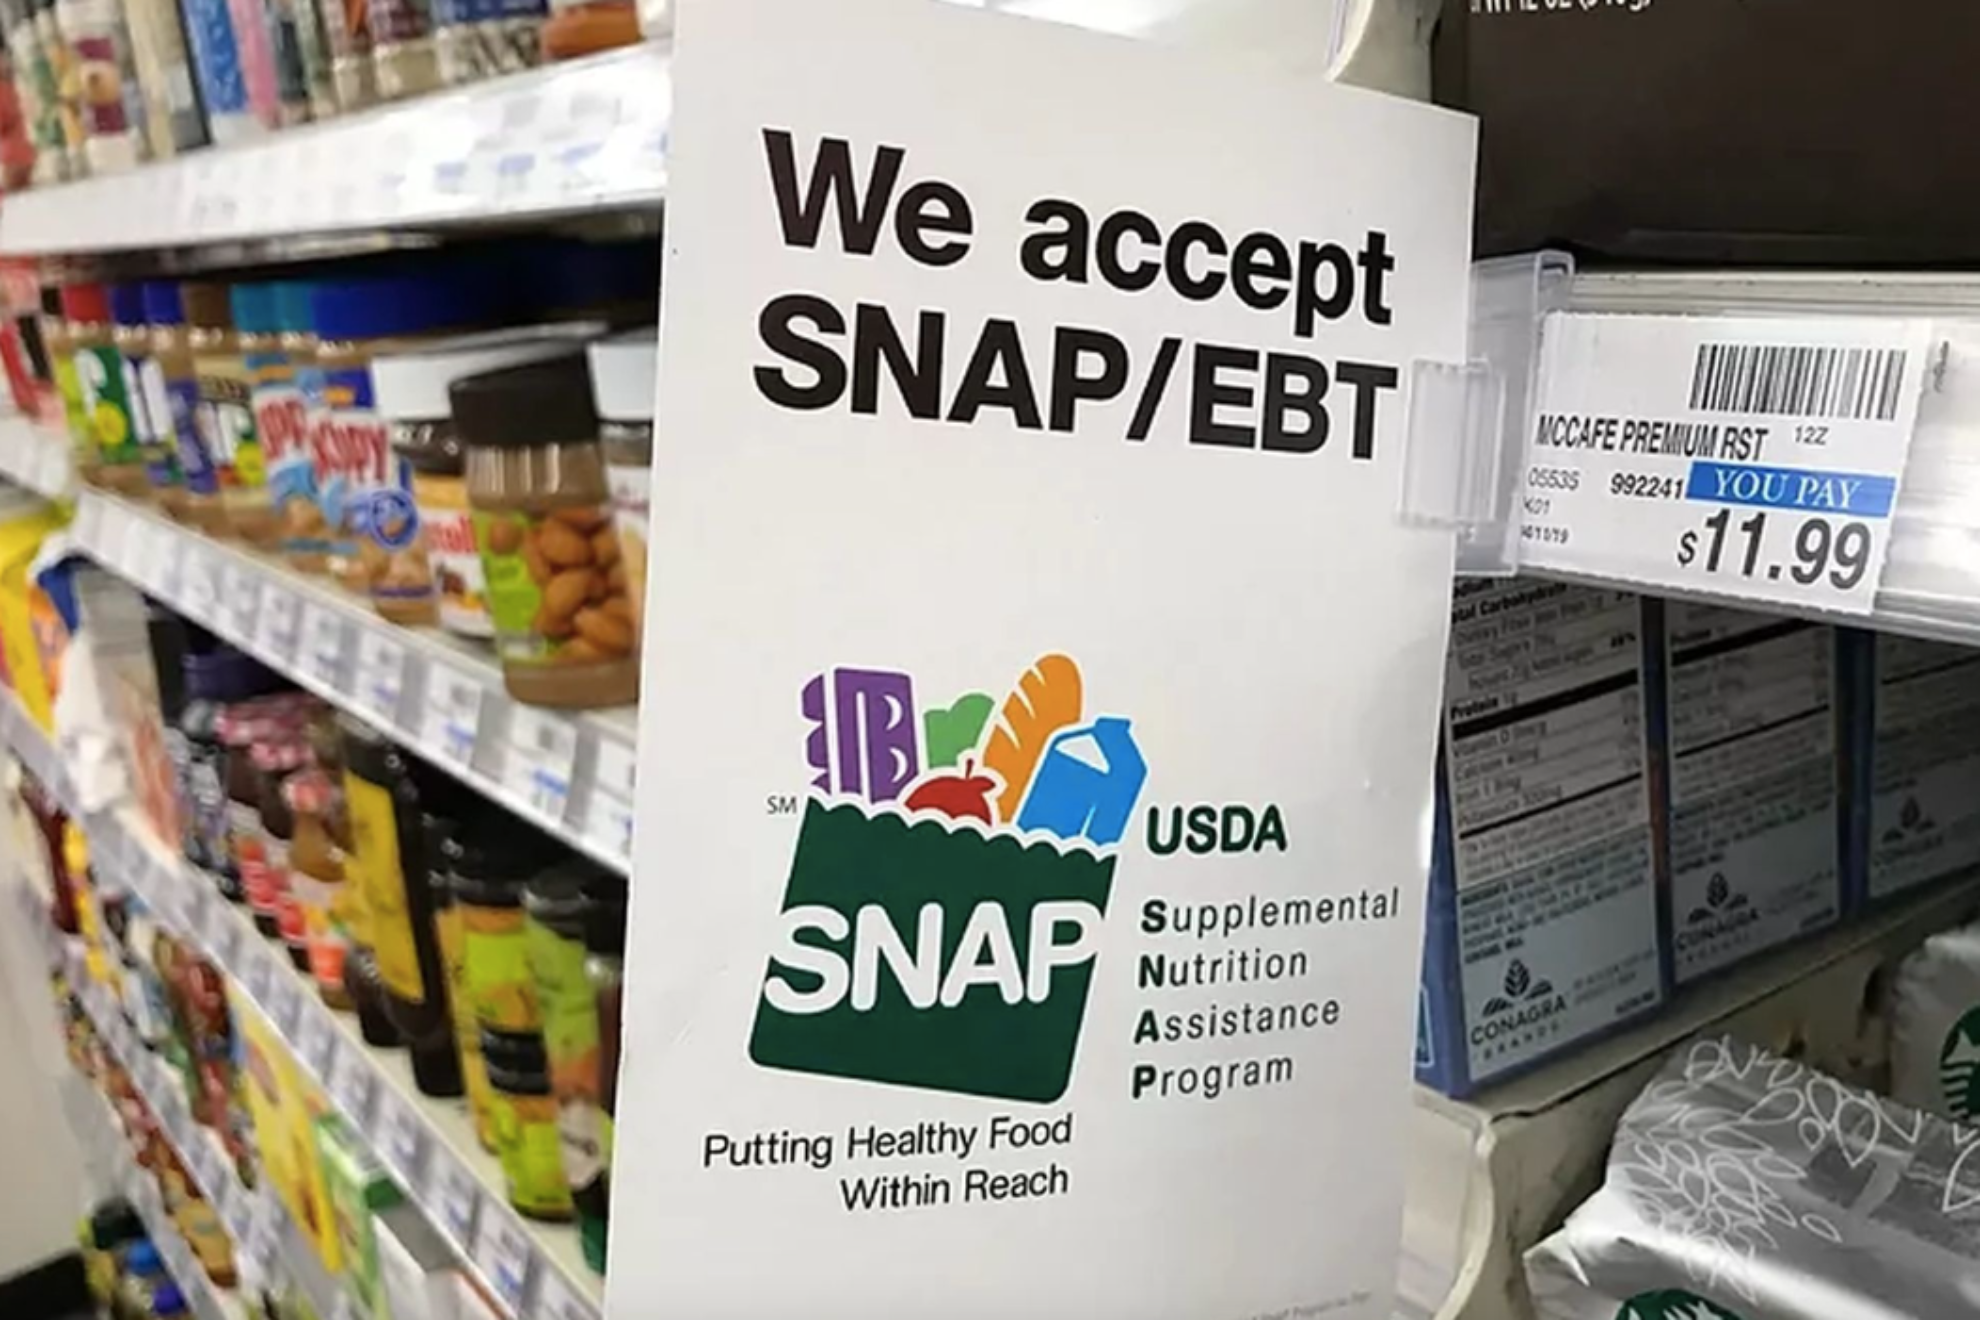 Florida SNAP Benefits: Is your November payment being deposited this week? Find out here